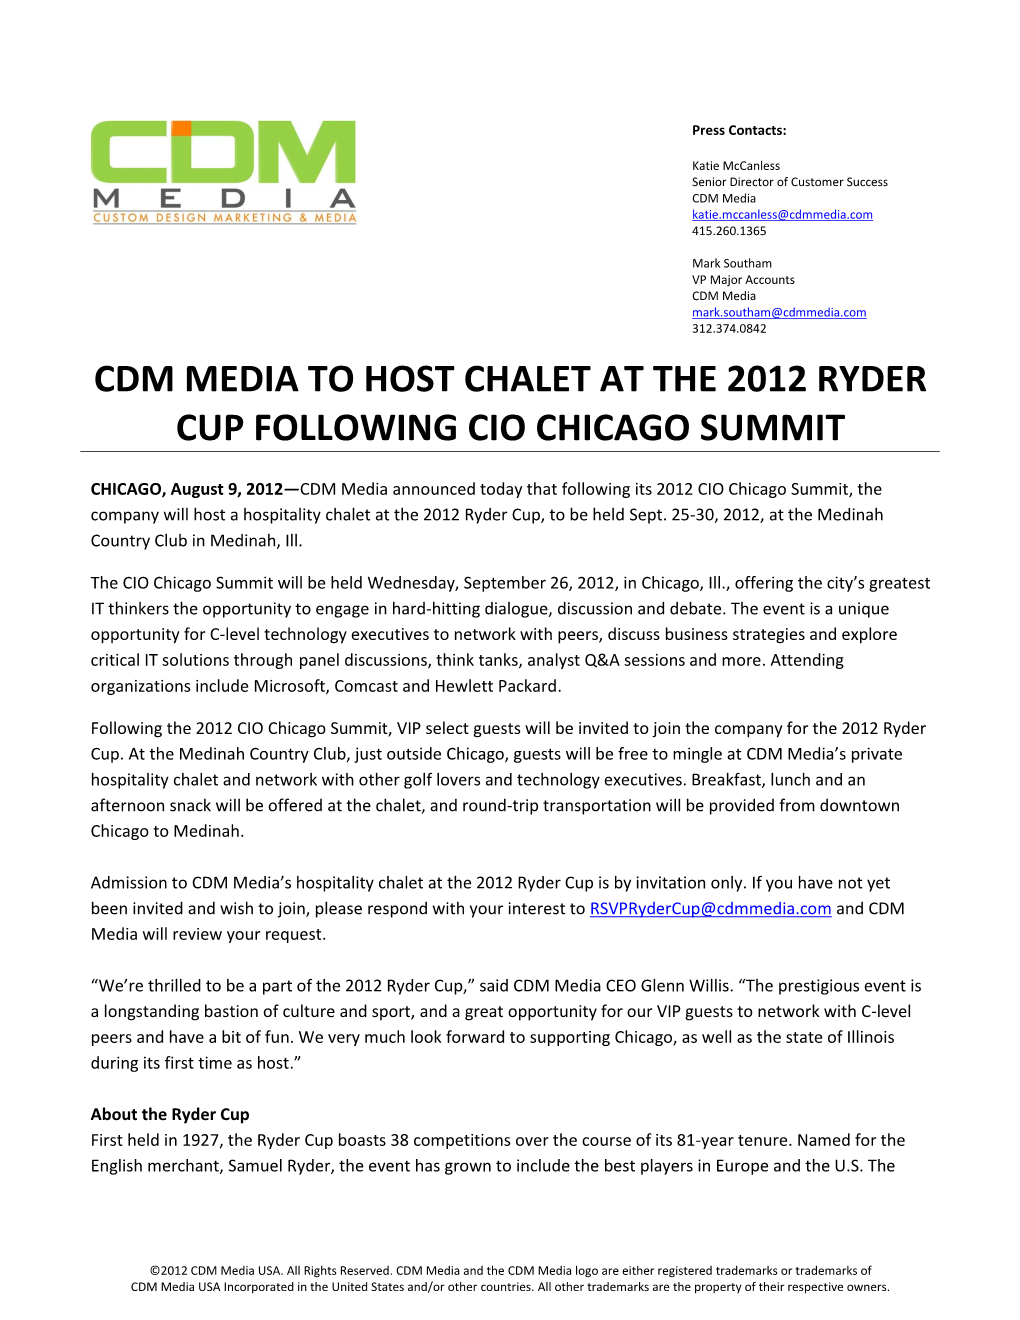 Cdm Media to Host Chalet at the 2012 Ryder Cup Following Cio Chicago Summit